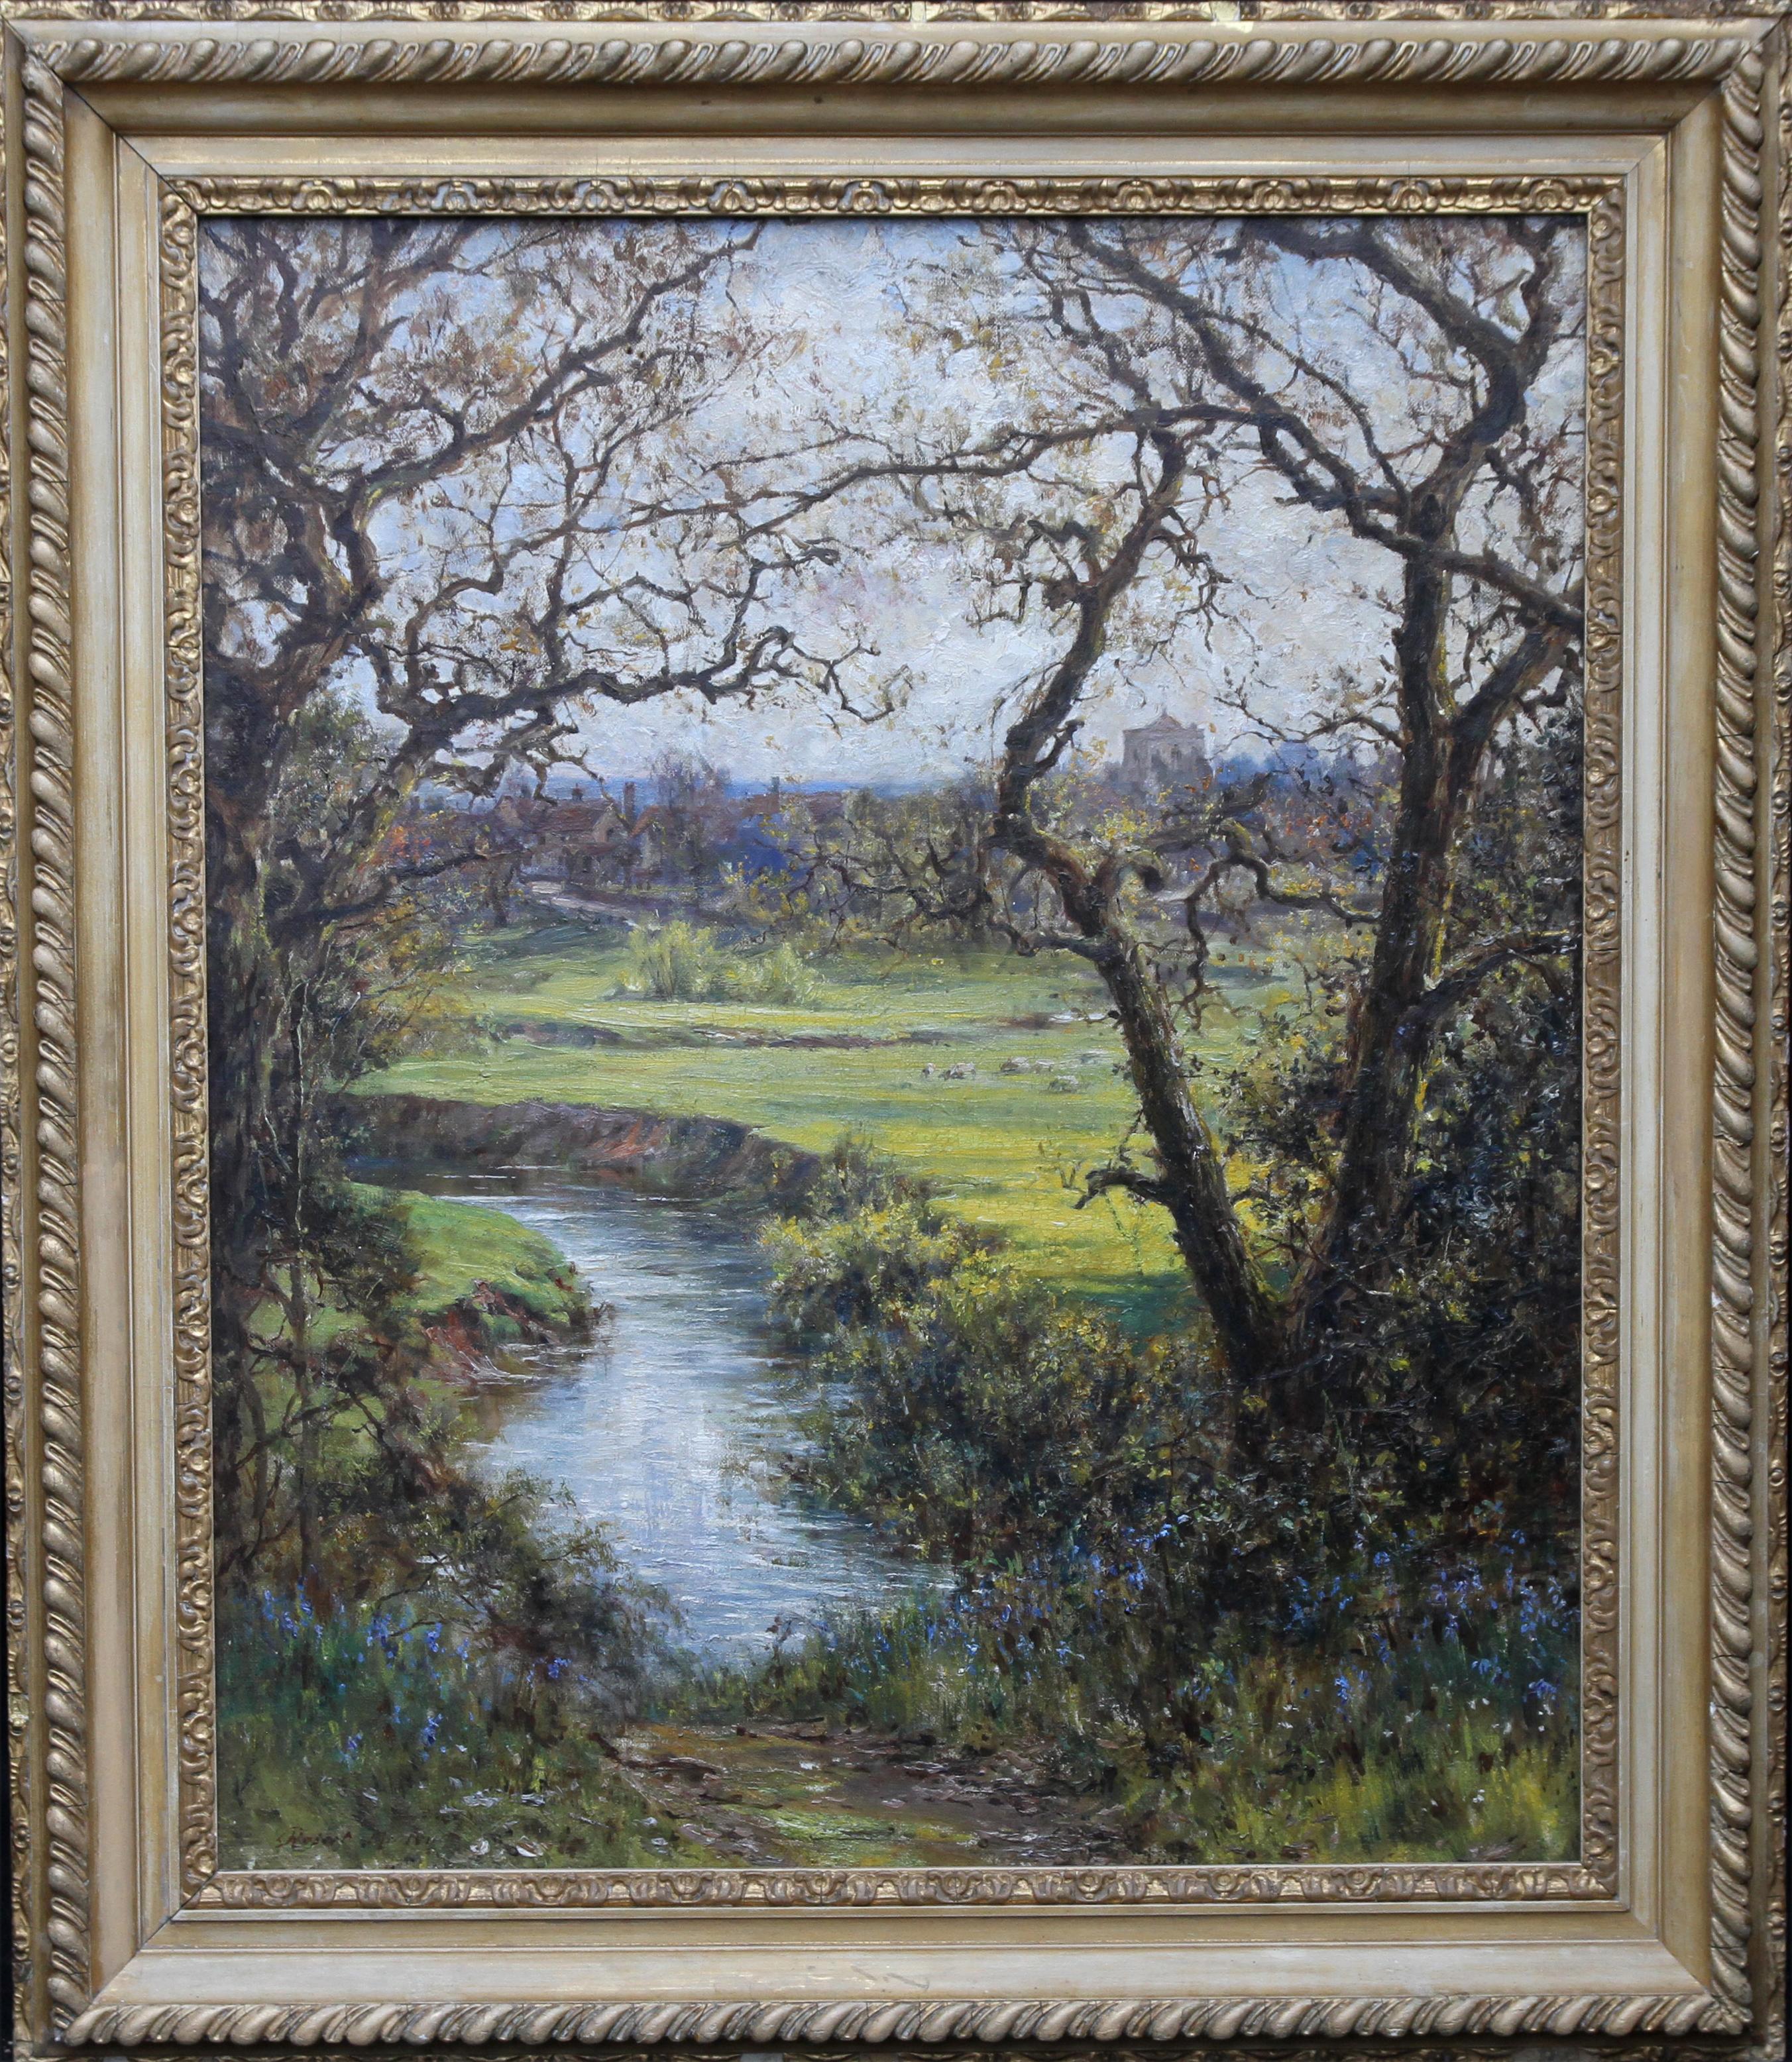 Surrey Landscape - British early 20thC Impressionist Slade School oil painting  For Sale 5